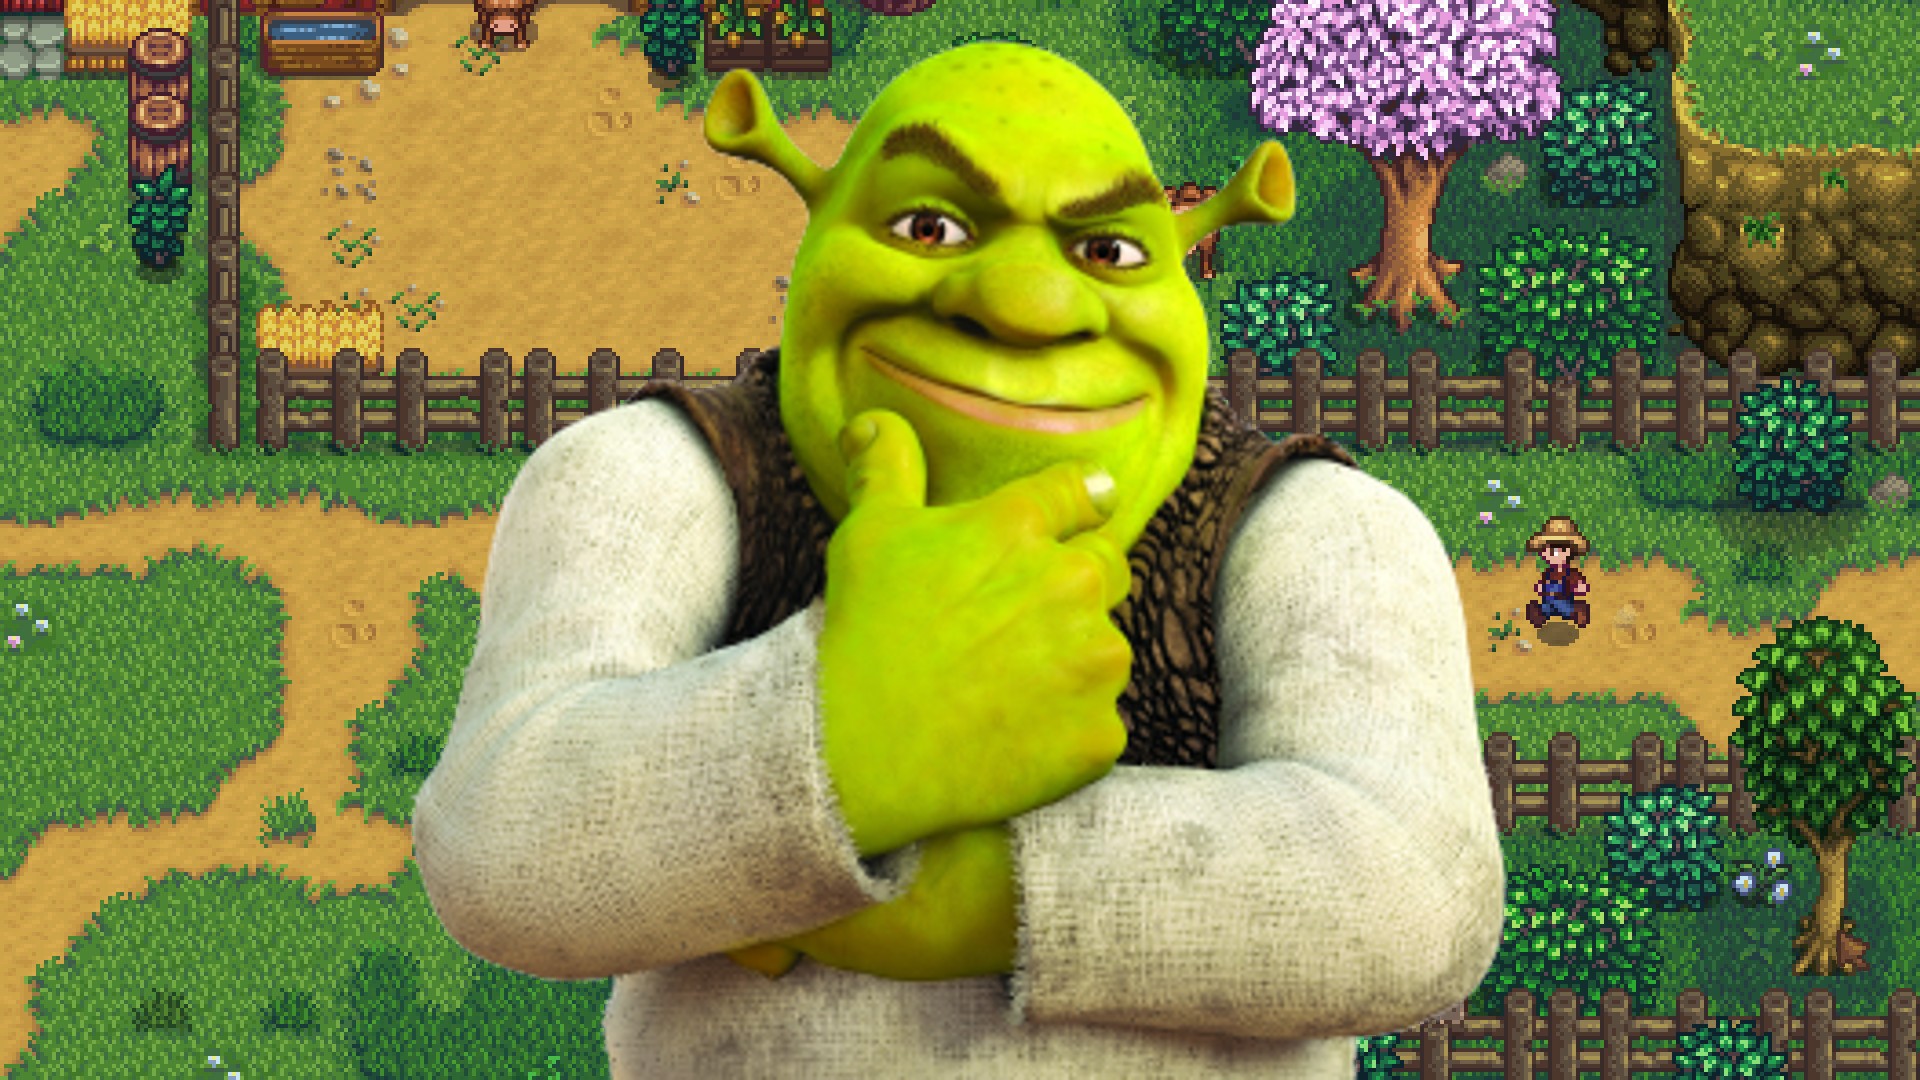 Stardew Valley mod lets you live in Shrek's swamp and in Shrek's house